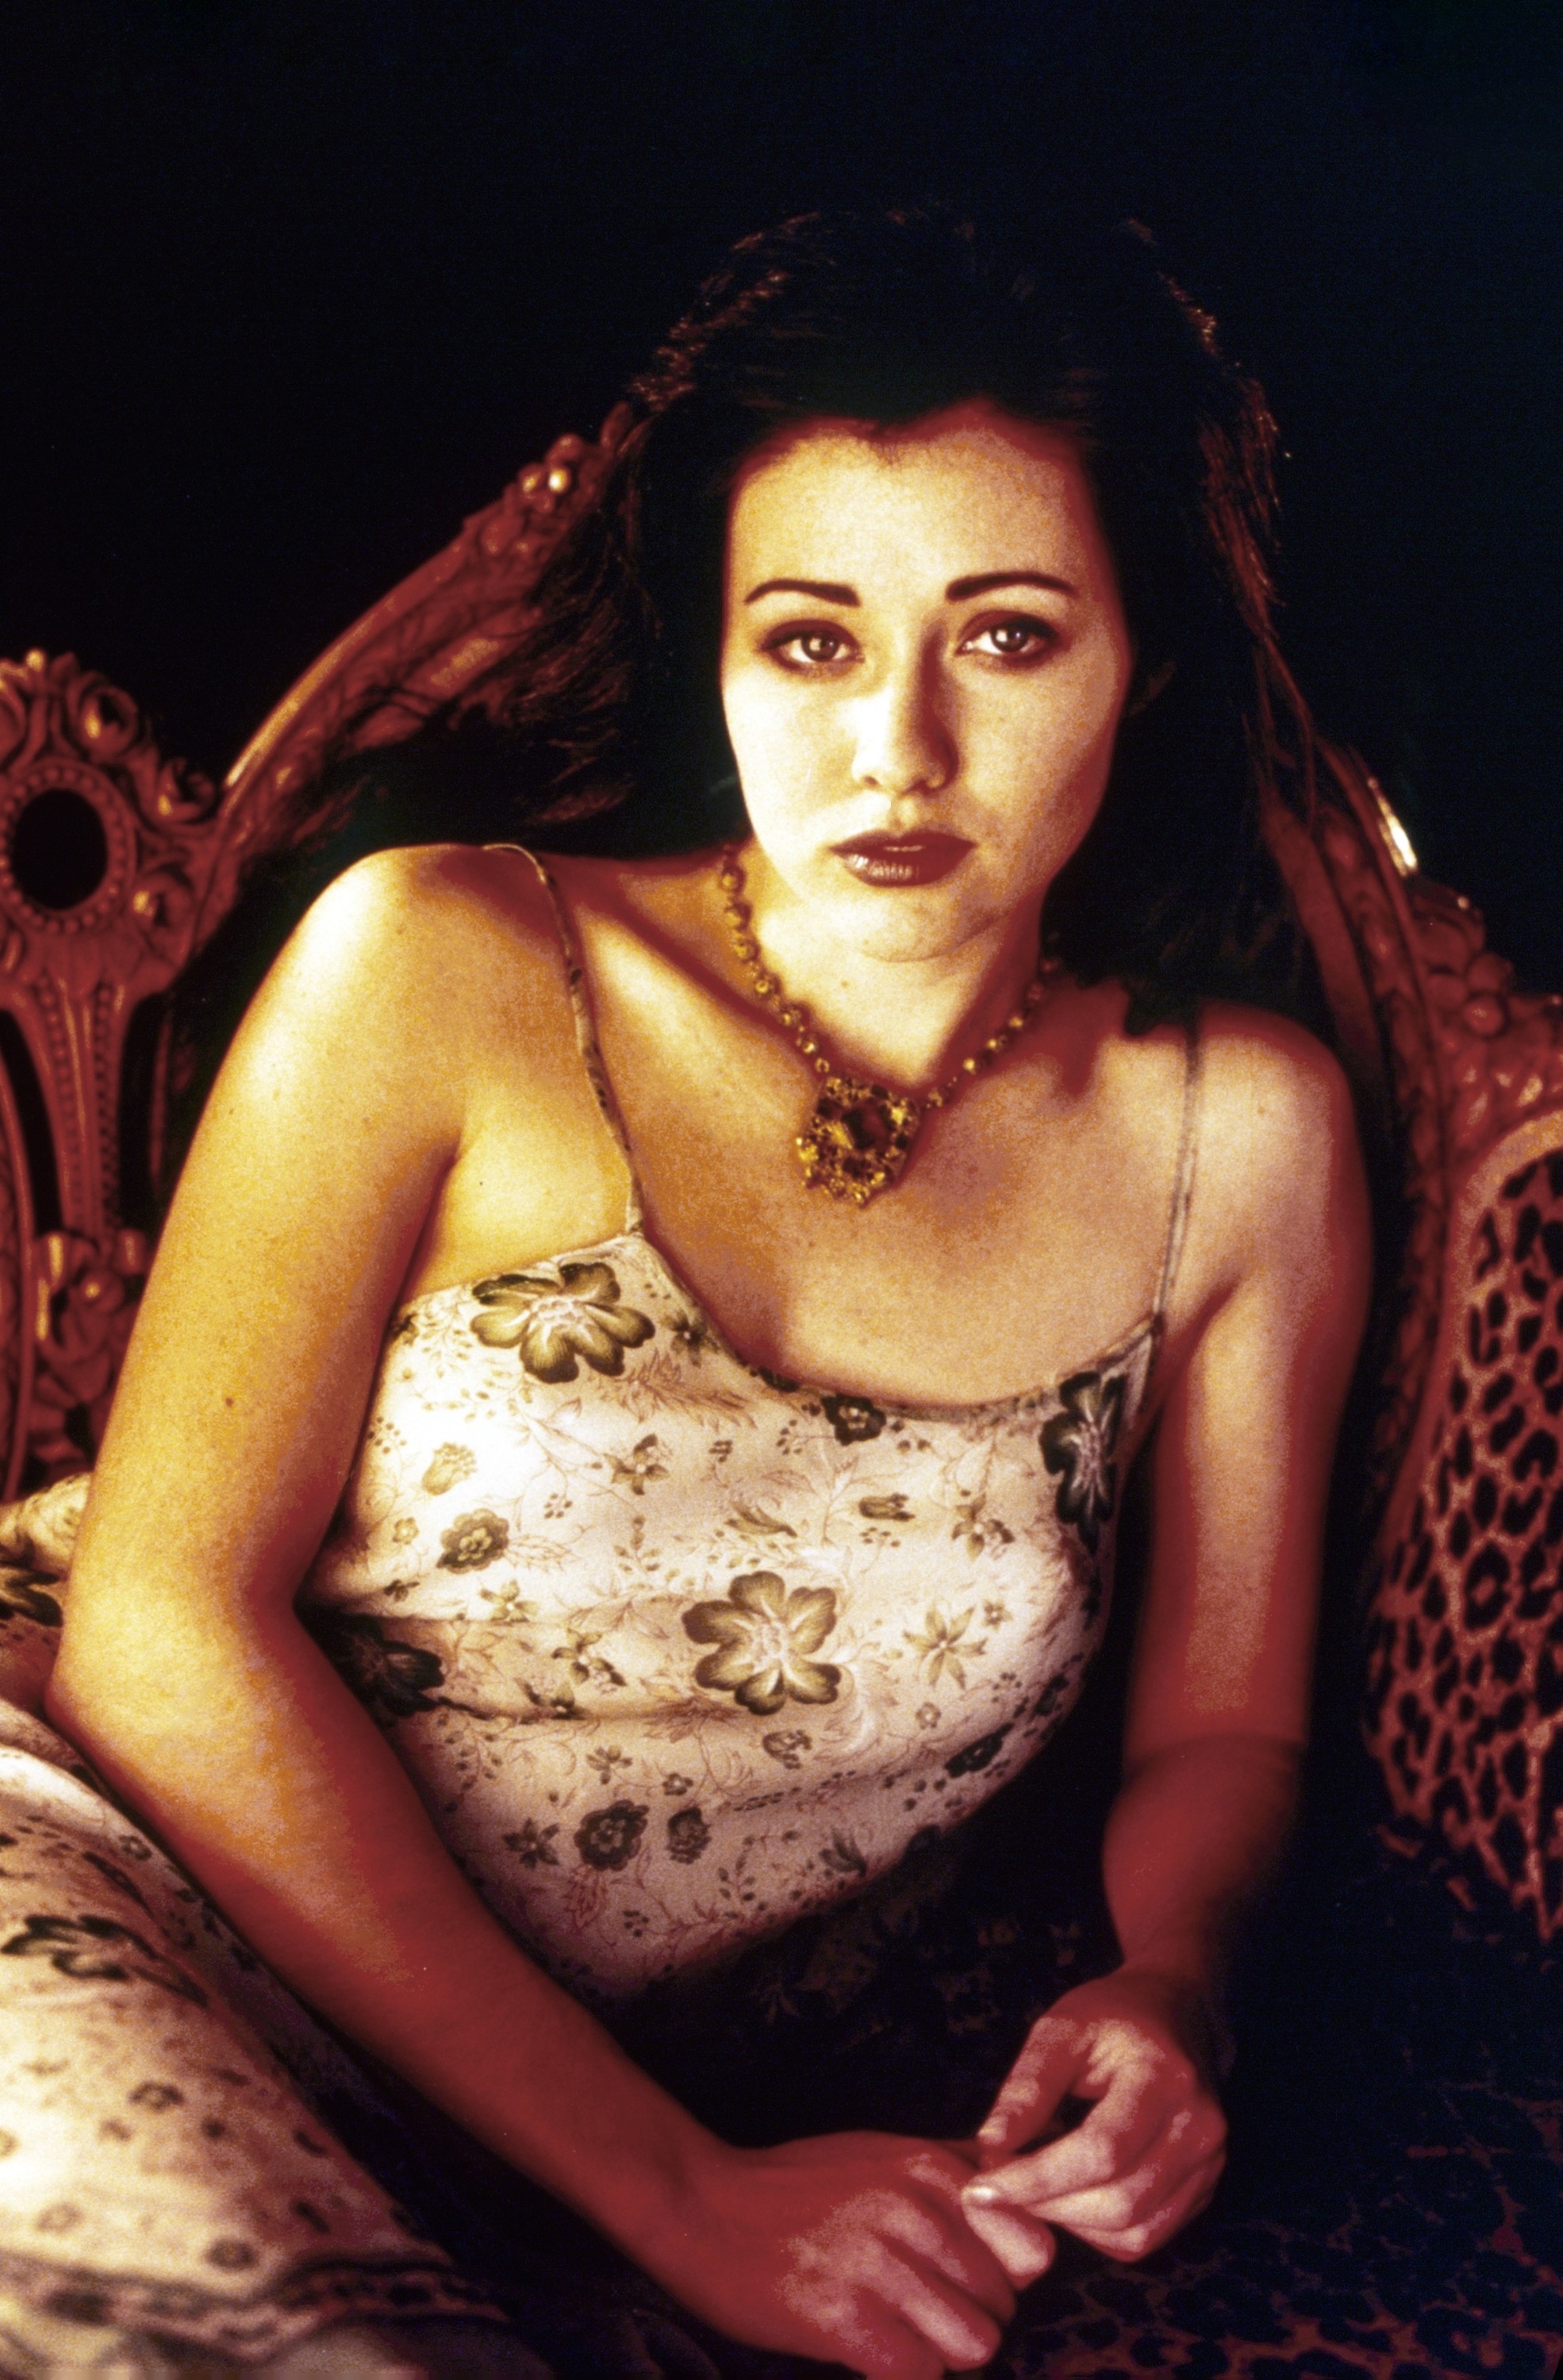 Shannen Doherty poses on a vintage couch wearing a floral spaghetti-strap dress and a necklace